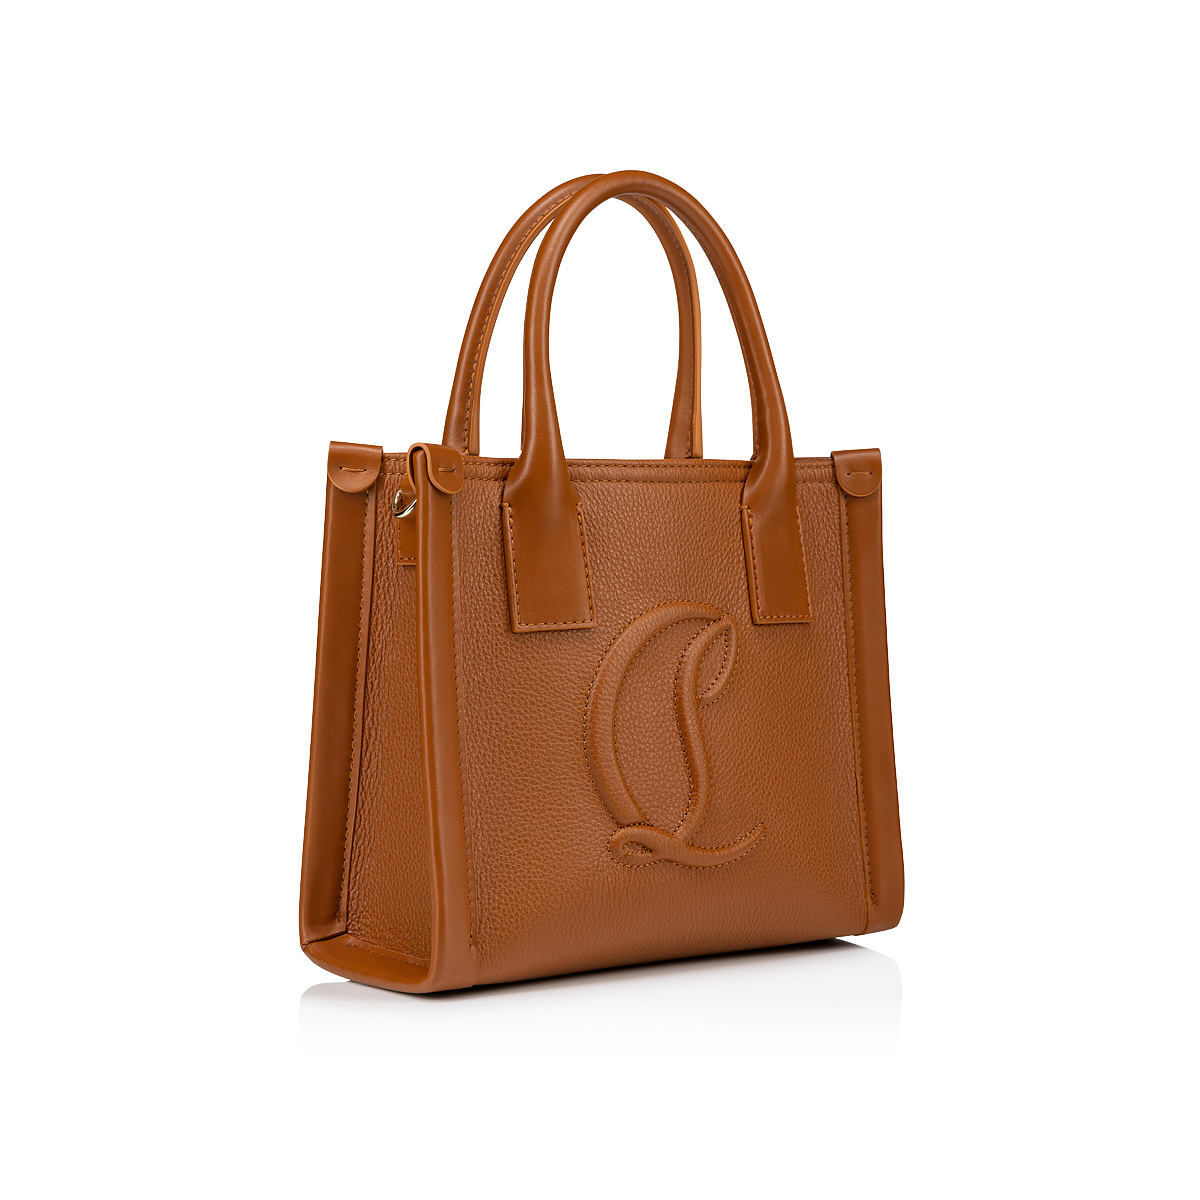 By My Side small - Tote bag - Grained calf leather - Cuoio